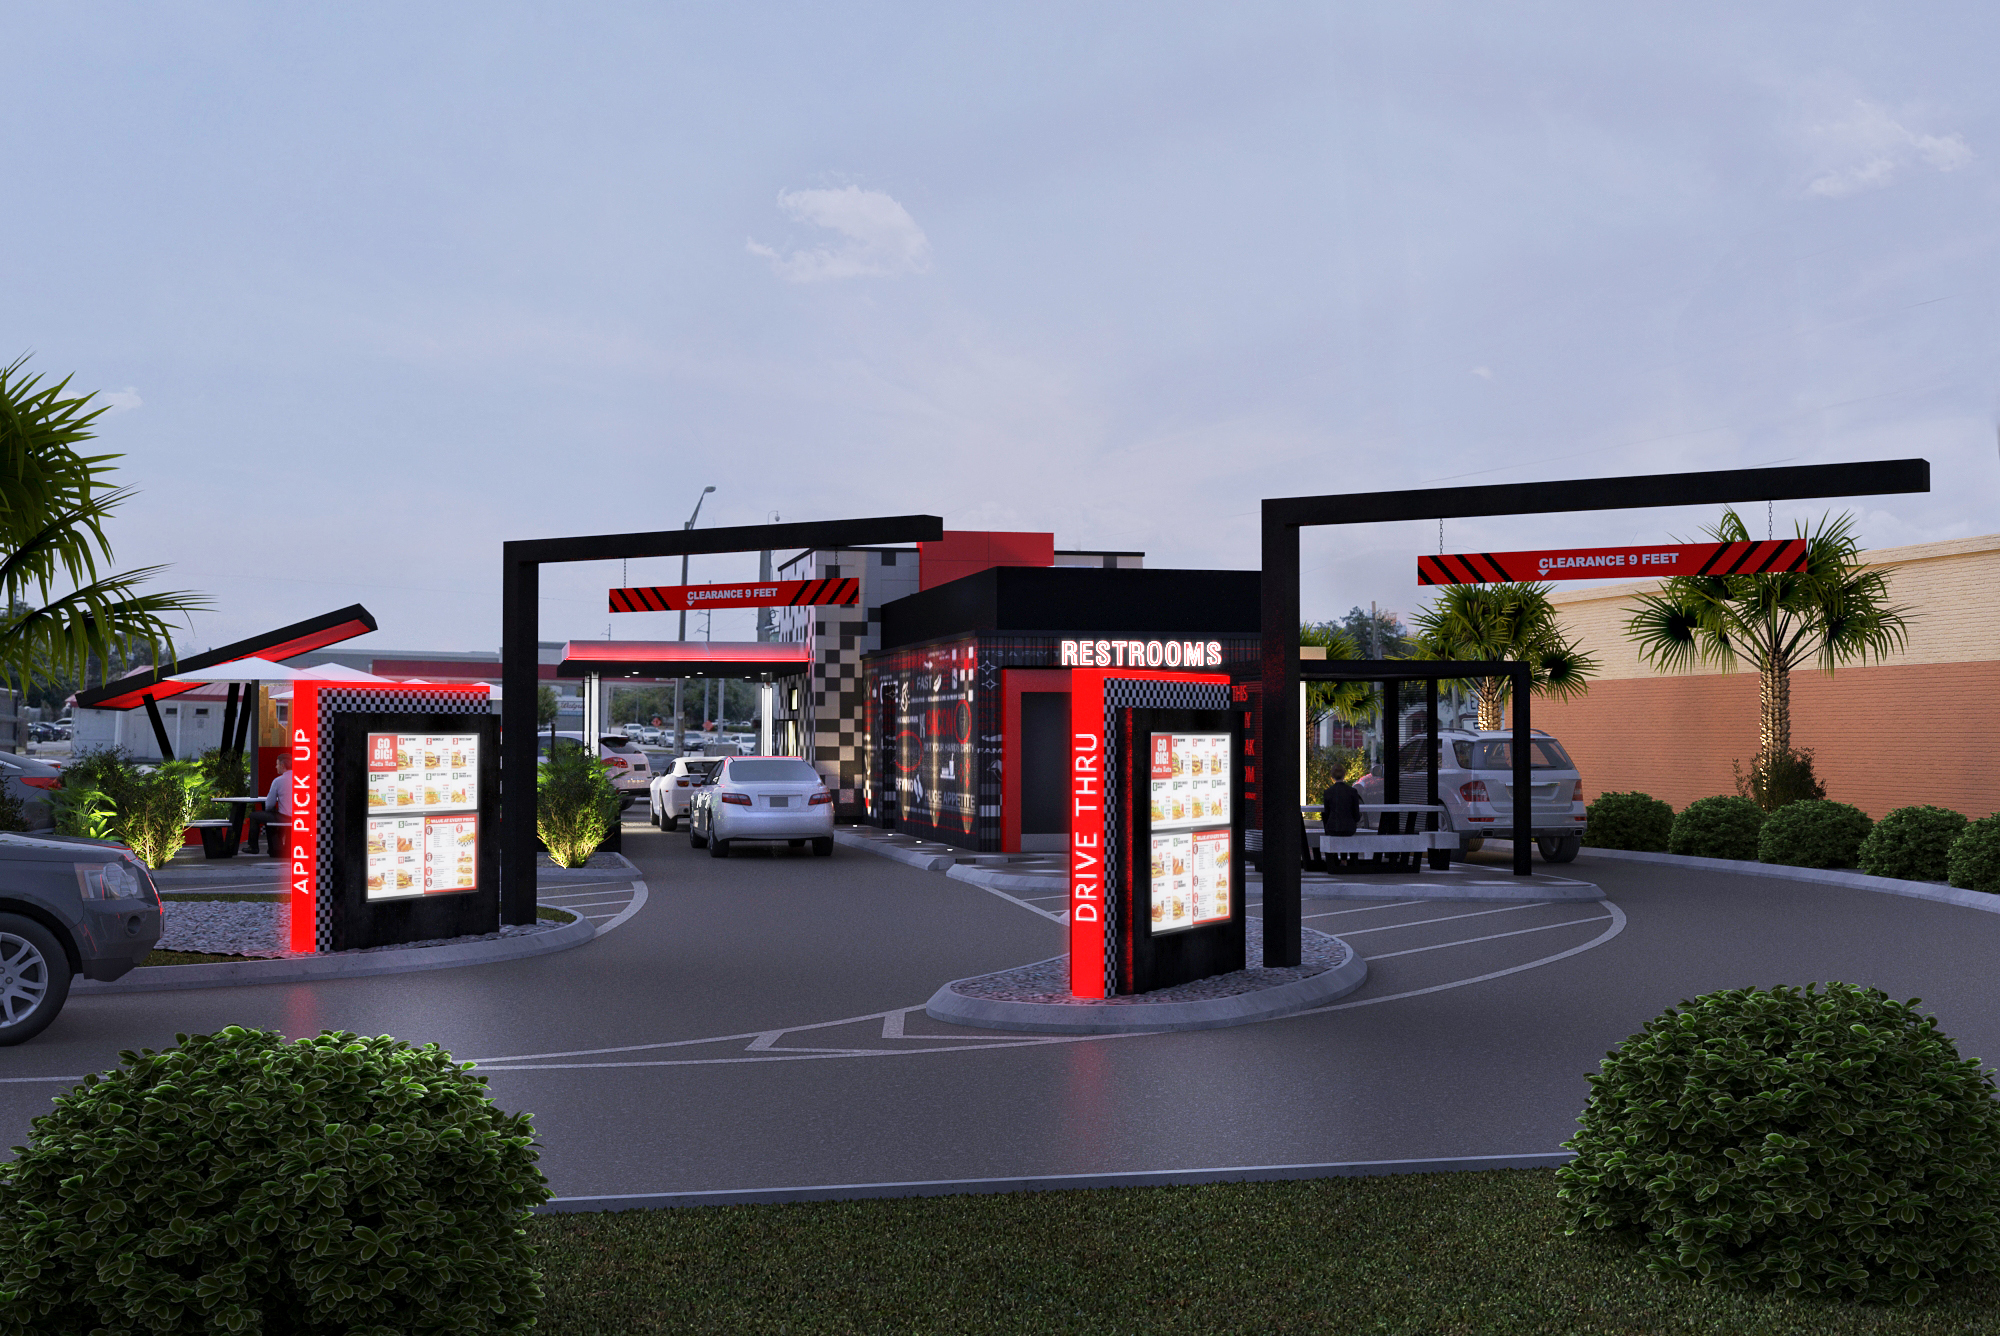 Courtesy. The first fully reimaged Checkers restaurant, its restaurant of the future, will be in Lakeland.